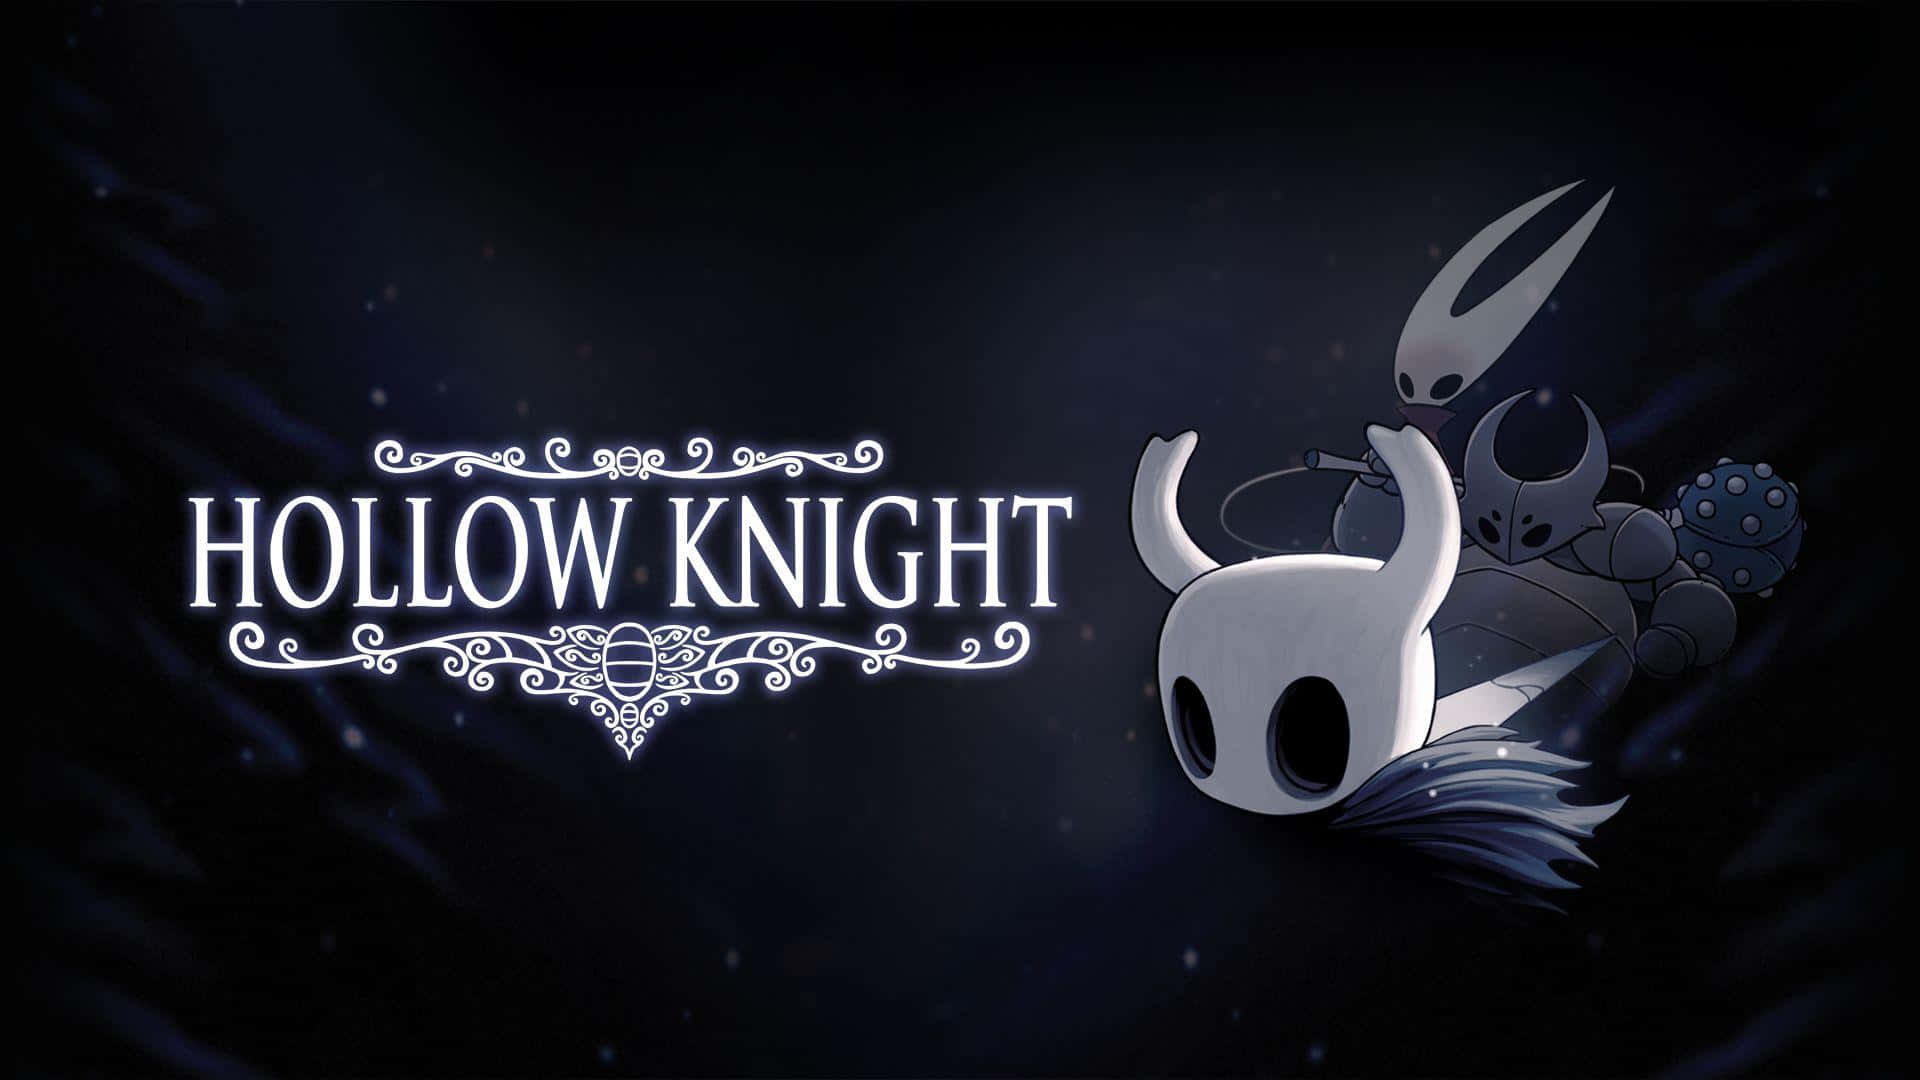 "Explore the stunning kingdom of Hallownest in Hollow Knight"